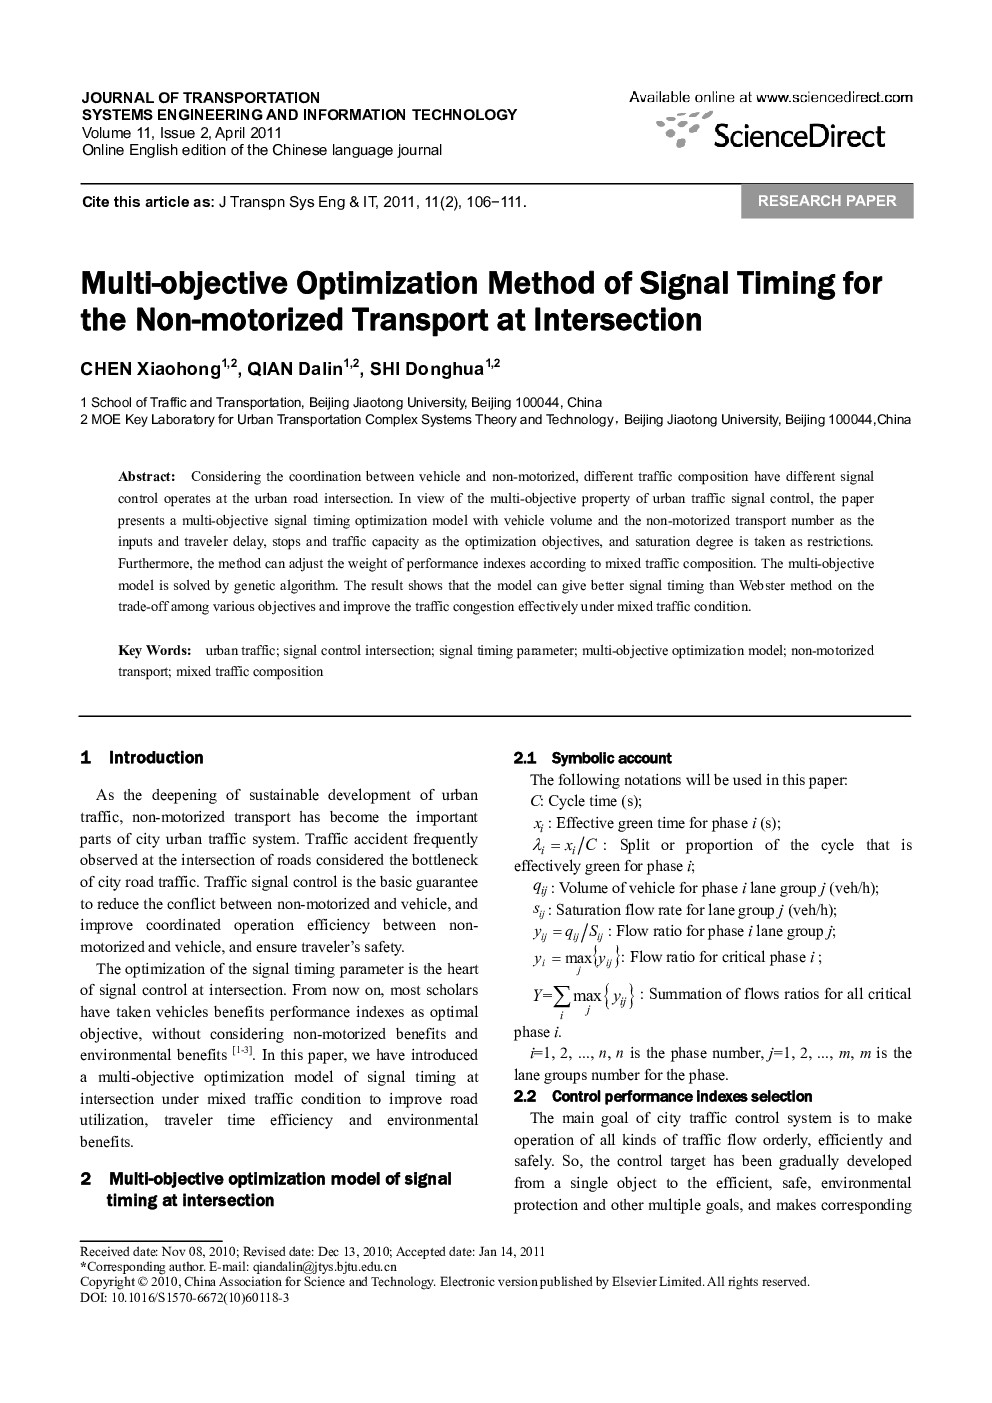 Multi-objective Optimization Method of Signal Timing for the Non-motorized Transport at Intersection